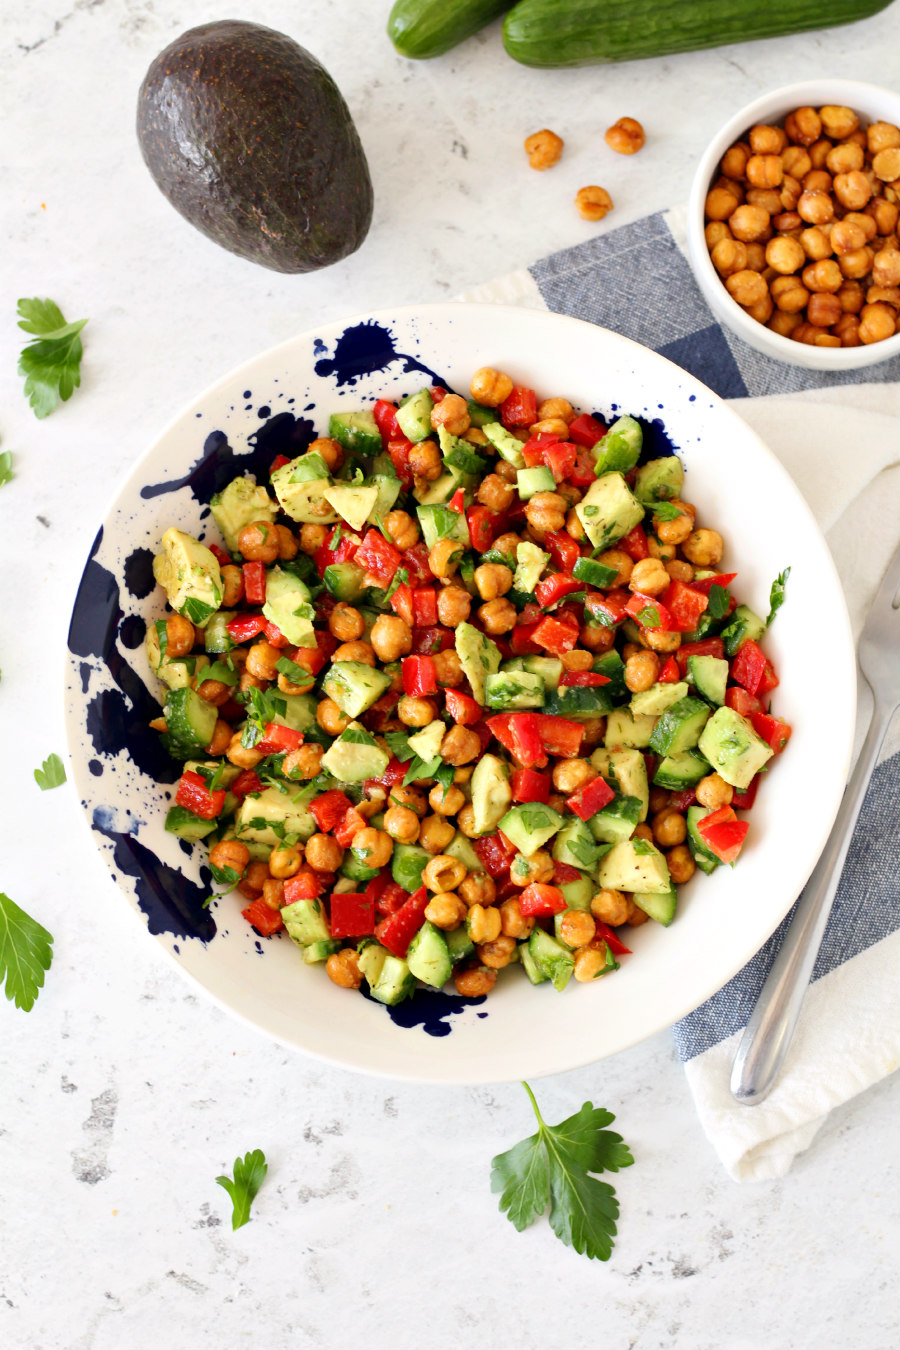 Flat lay photo of Crispy Chickpea and Avocado Salad in a white bowl. Ingredients are spread around the salad bowl.